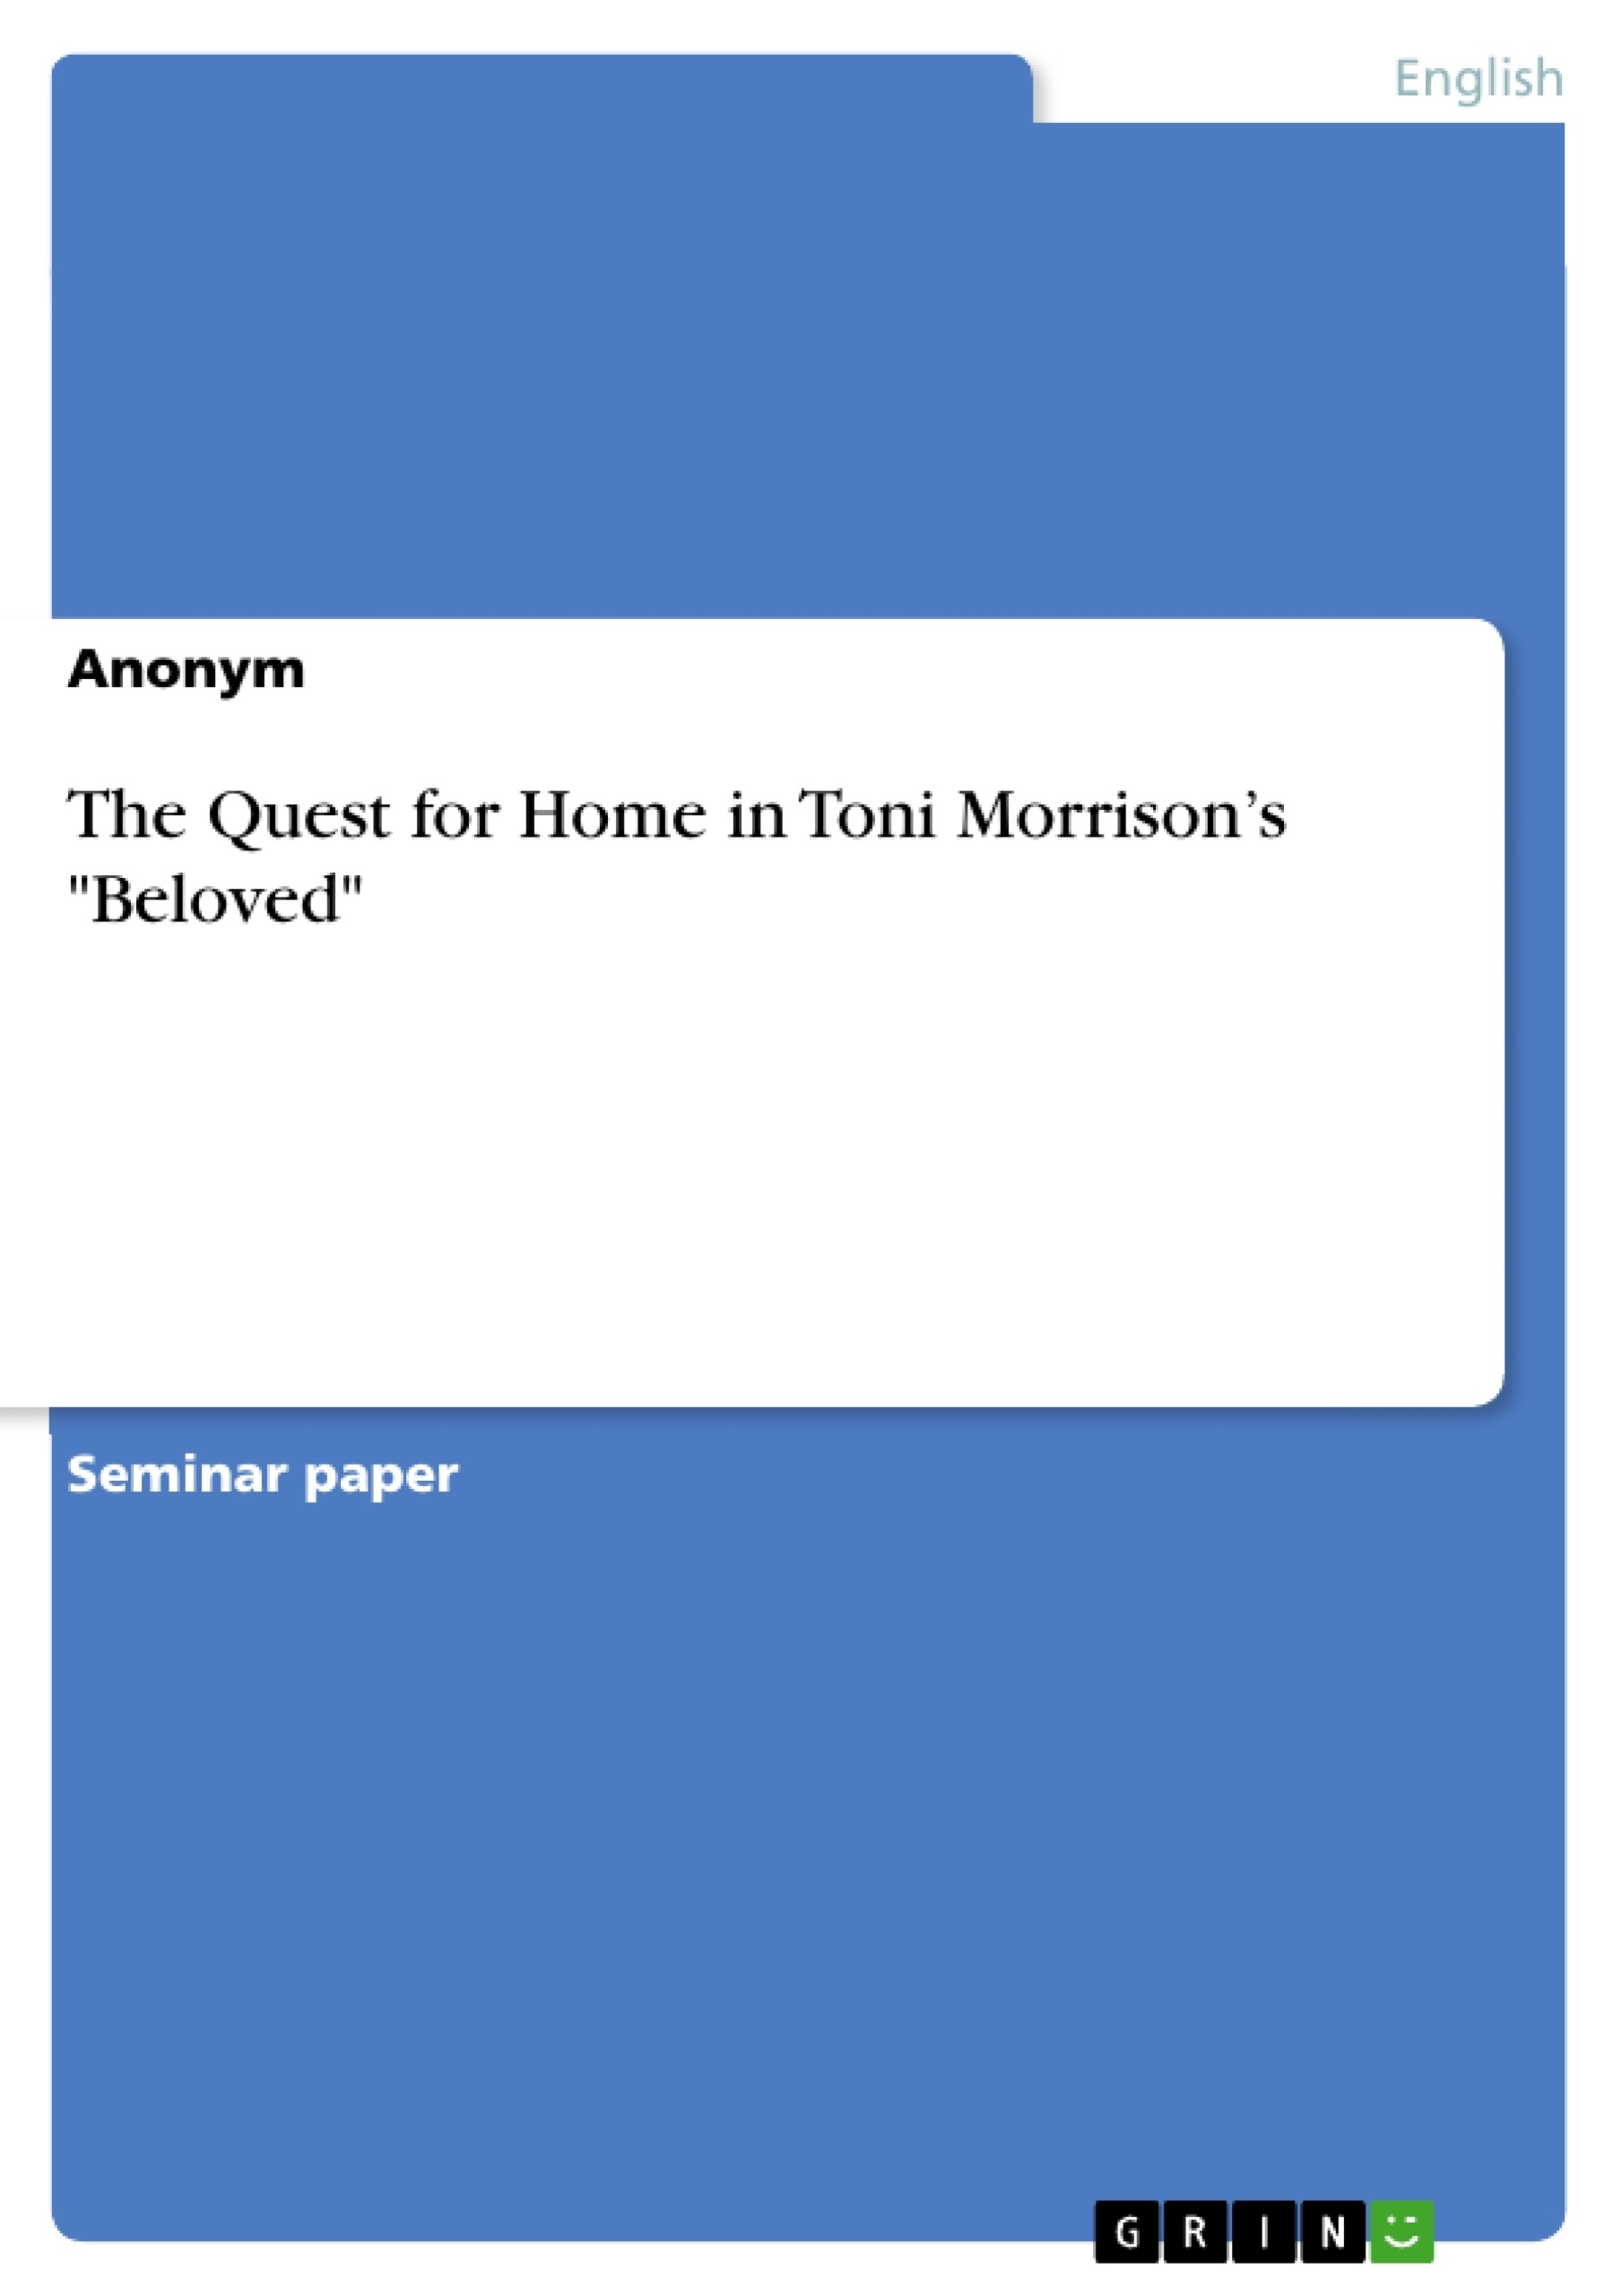 Titel: The Quest for Home in Toni Morrison’s "Beloved"